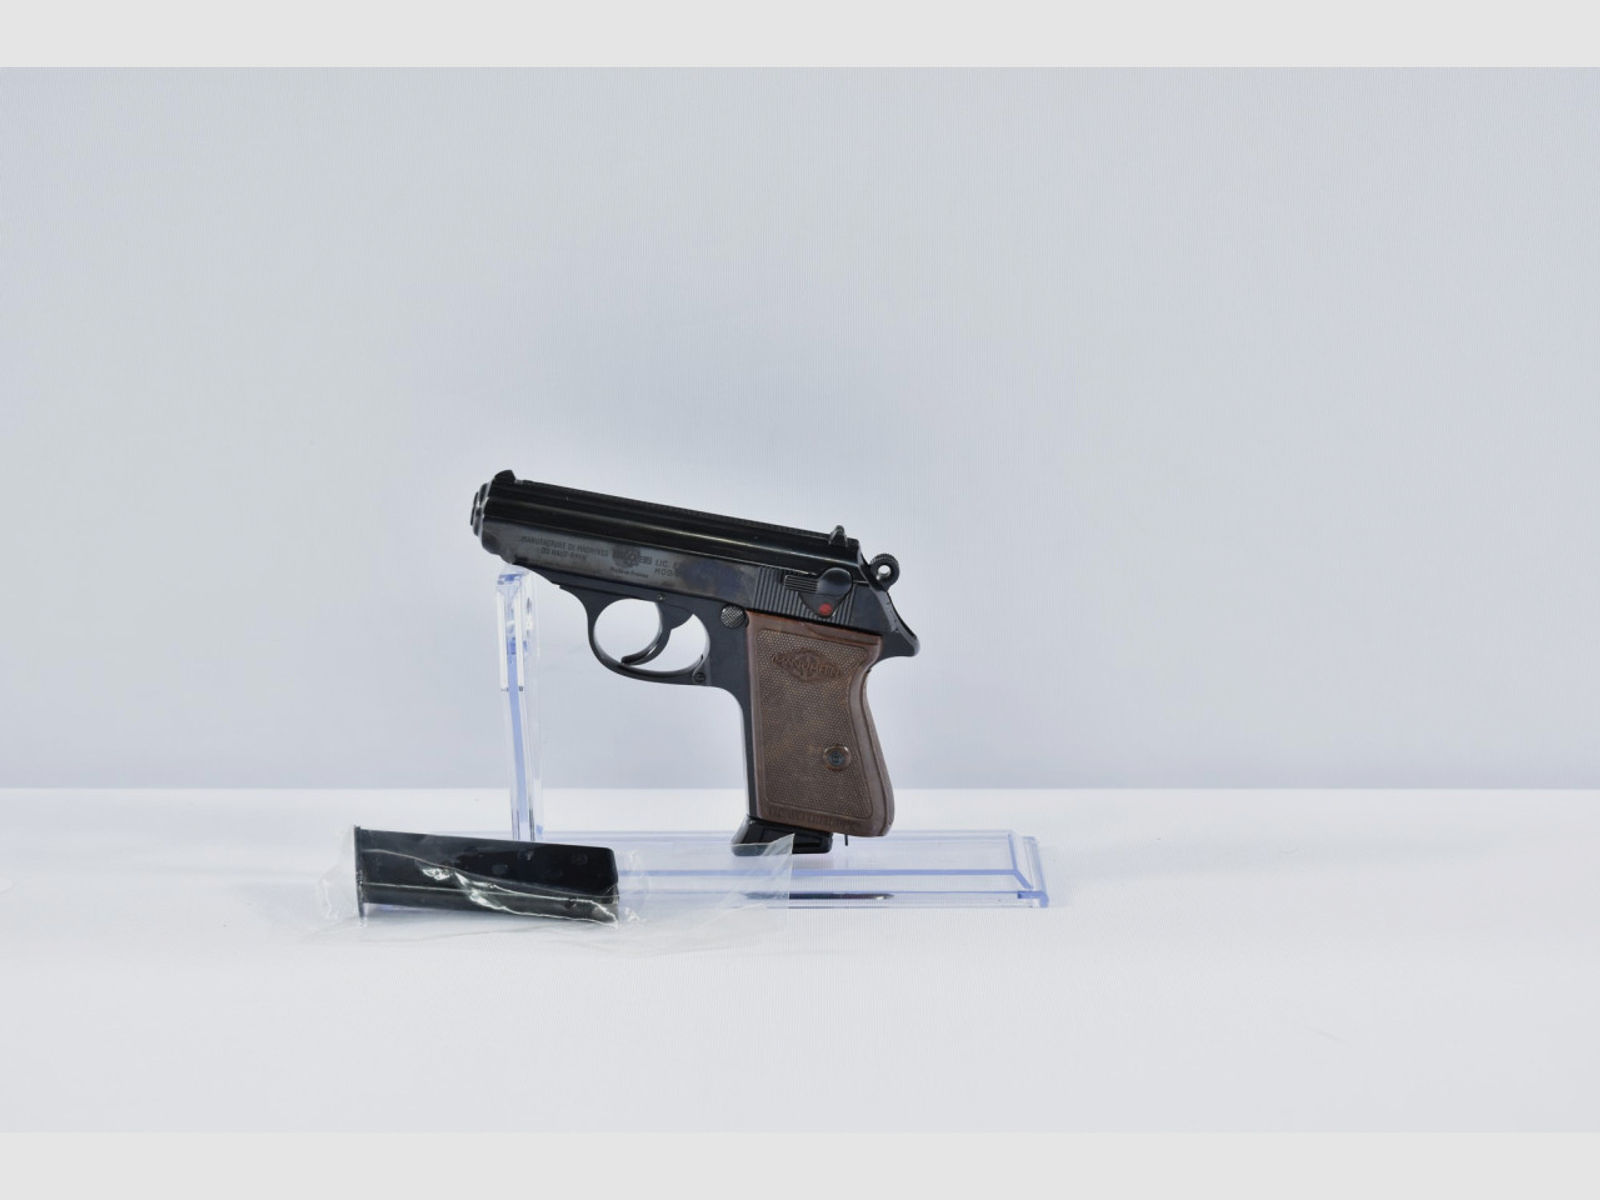 Walther PPK Manurhin 7,65mmBrowning Pistole